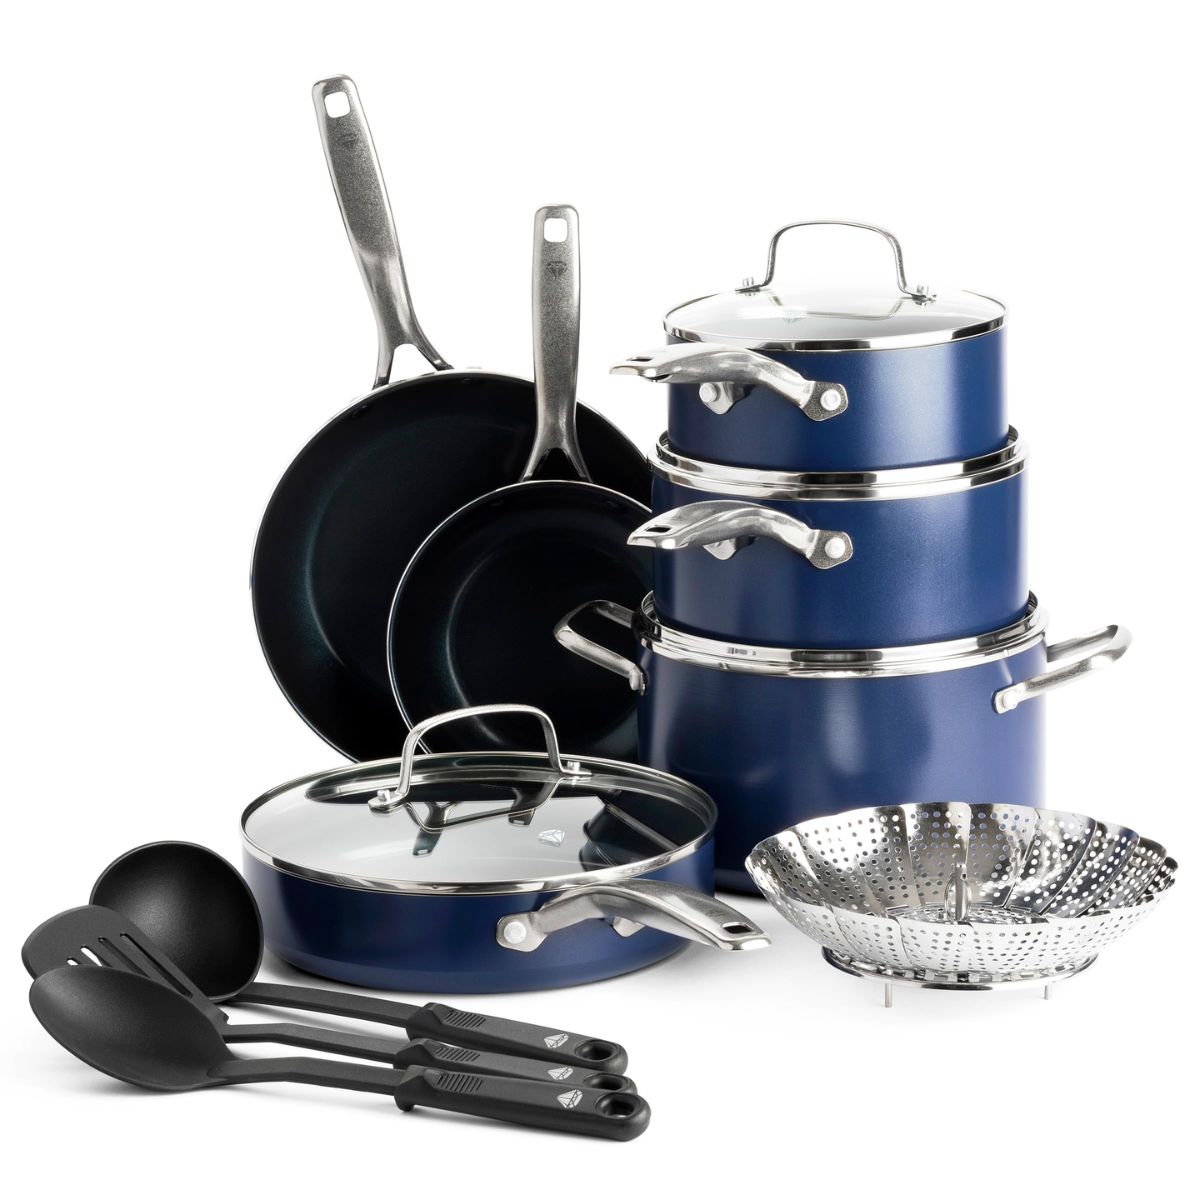 34. Infuse Sparkle and Love into Cooking with the Crystal-Infused Cooking Set - A Unique Anniversary Gift Idea